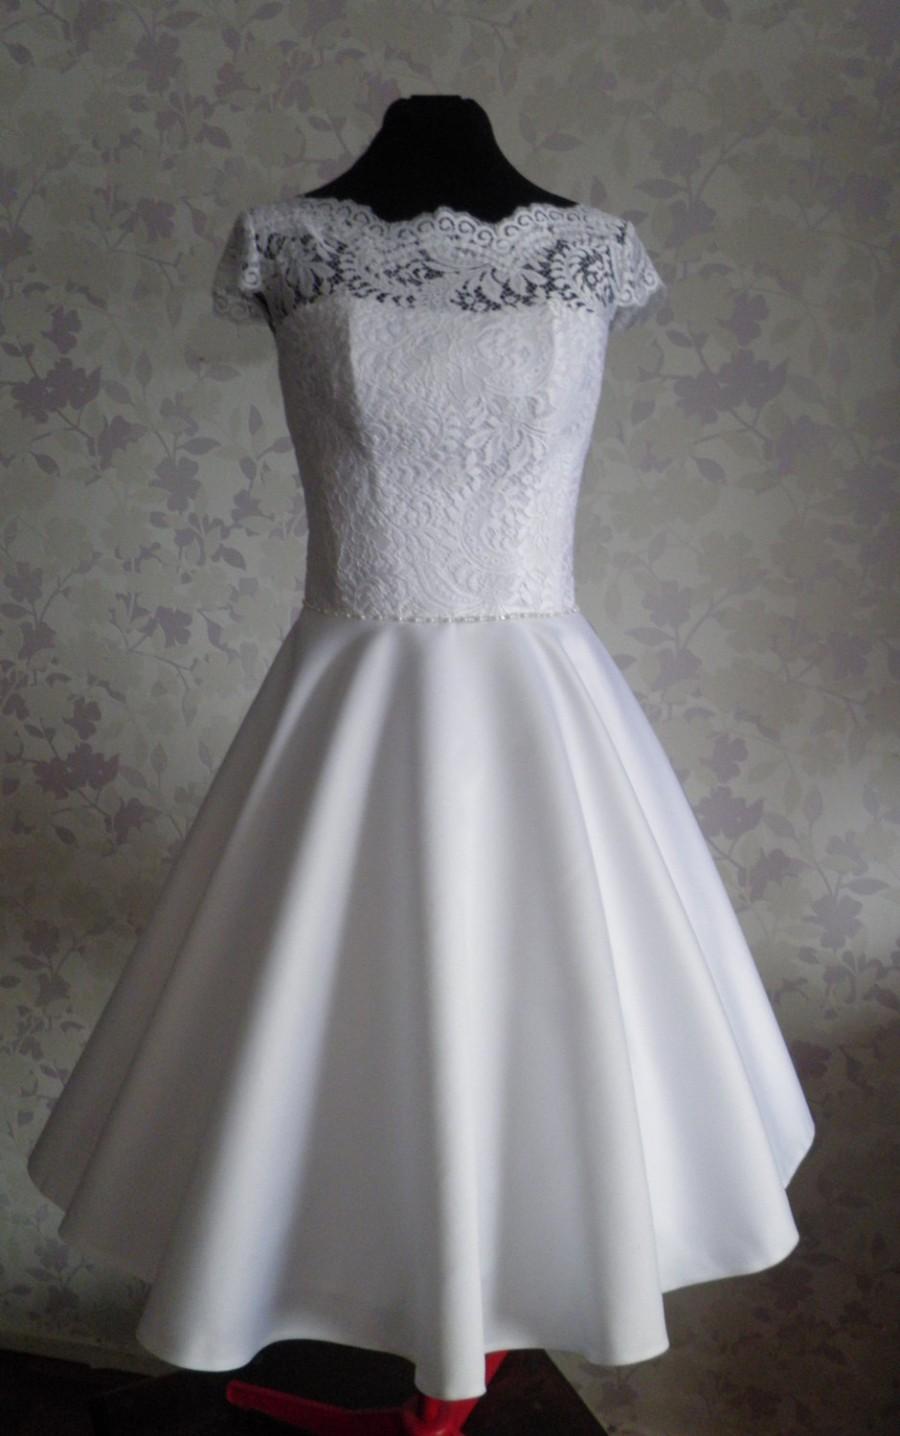 Hochzeit - Vintage Inspired Wedding Dress in style of Audrey Hepburn 1950 with Tea Length Skirt, Illusion Neckline, Lace Corset, V Shaped Back Cutout